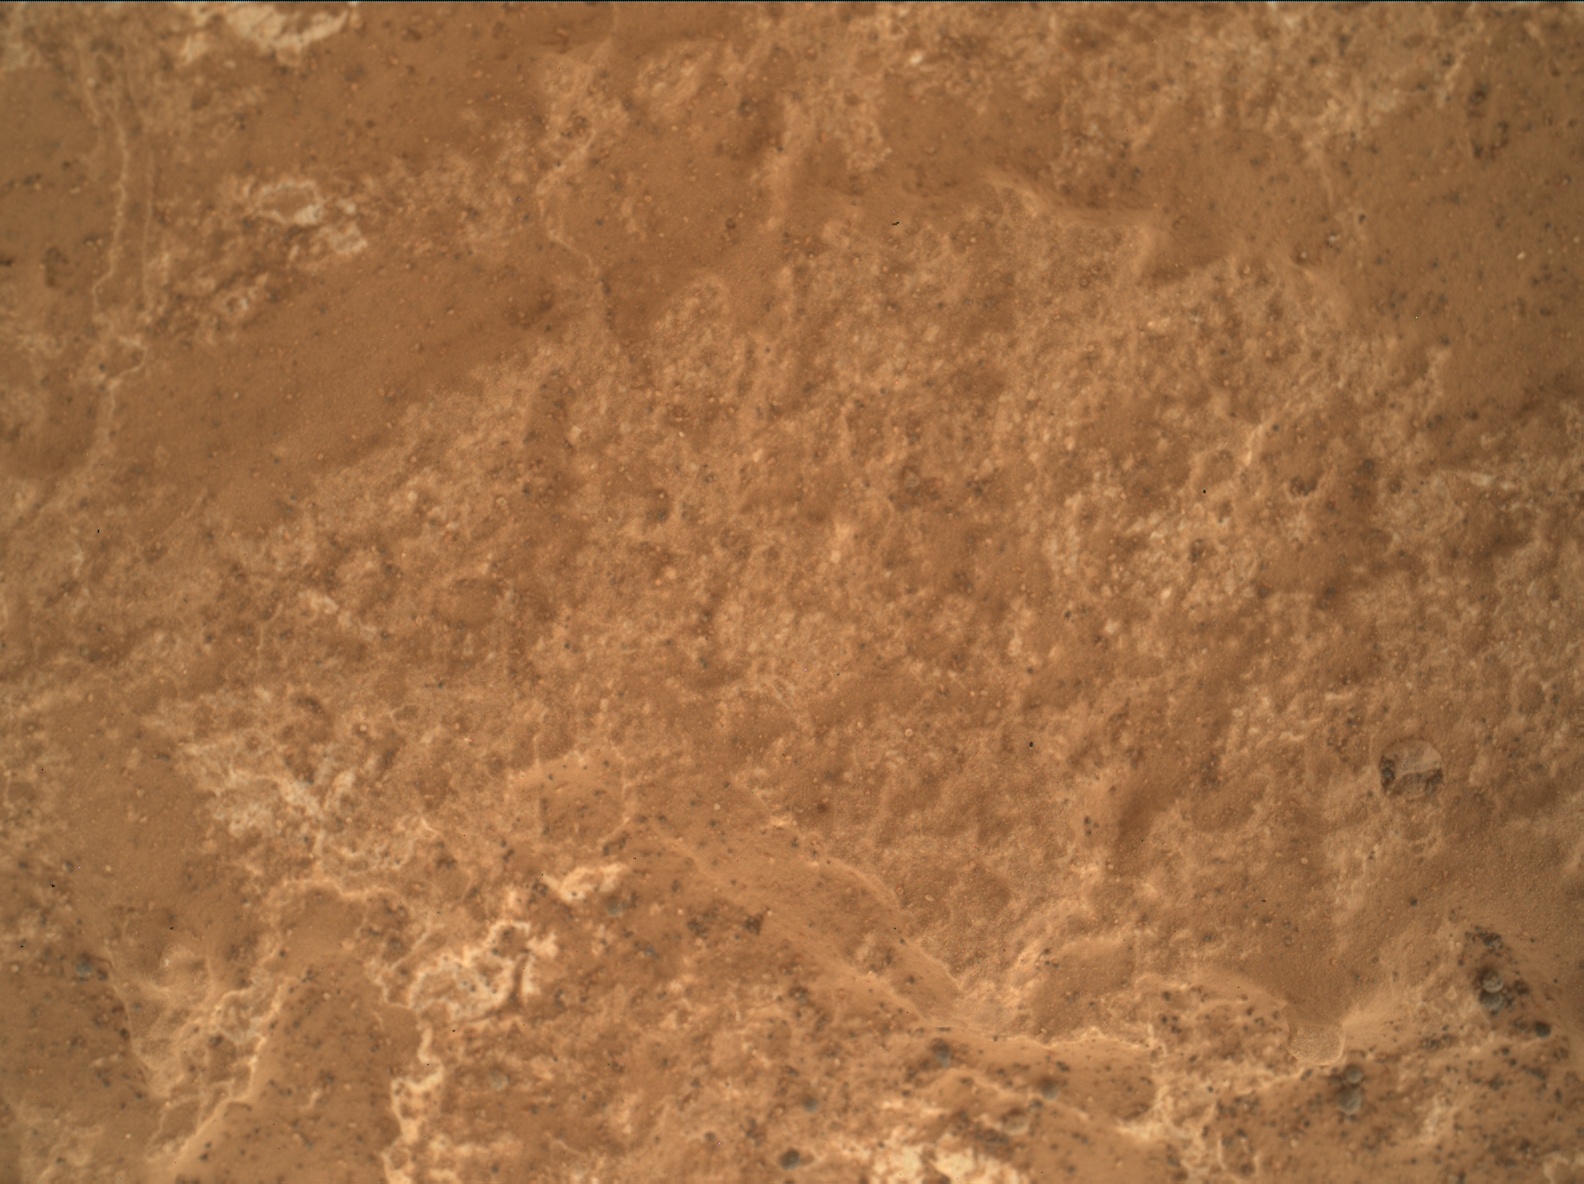 Nasa's Mars rover Curiosity acquired this image using its Mars Hand Lens Imager (MAHLI) on Sol 1732